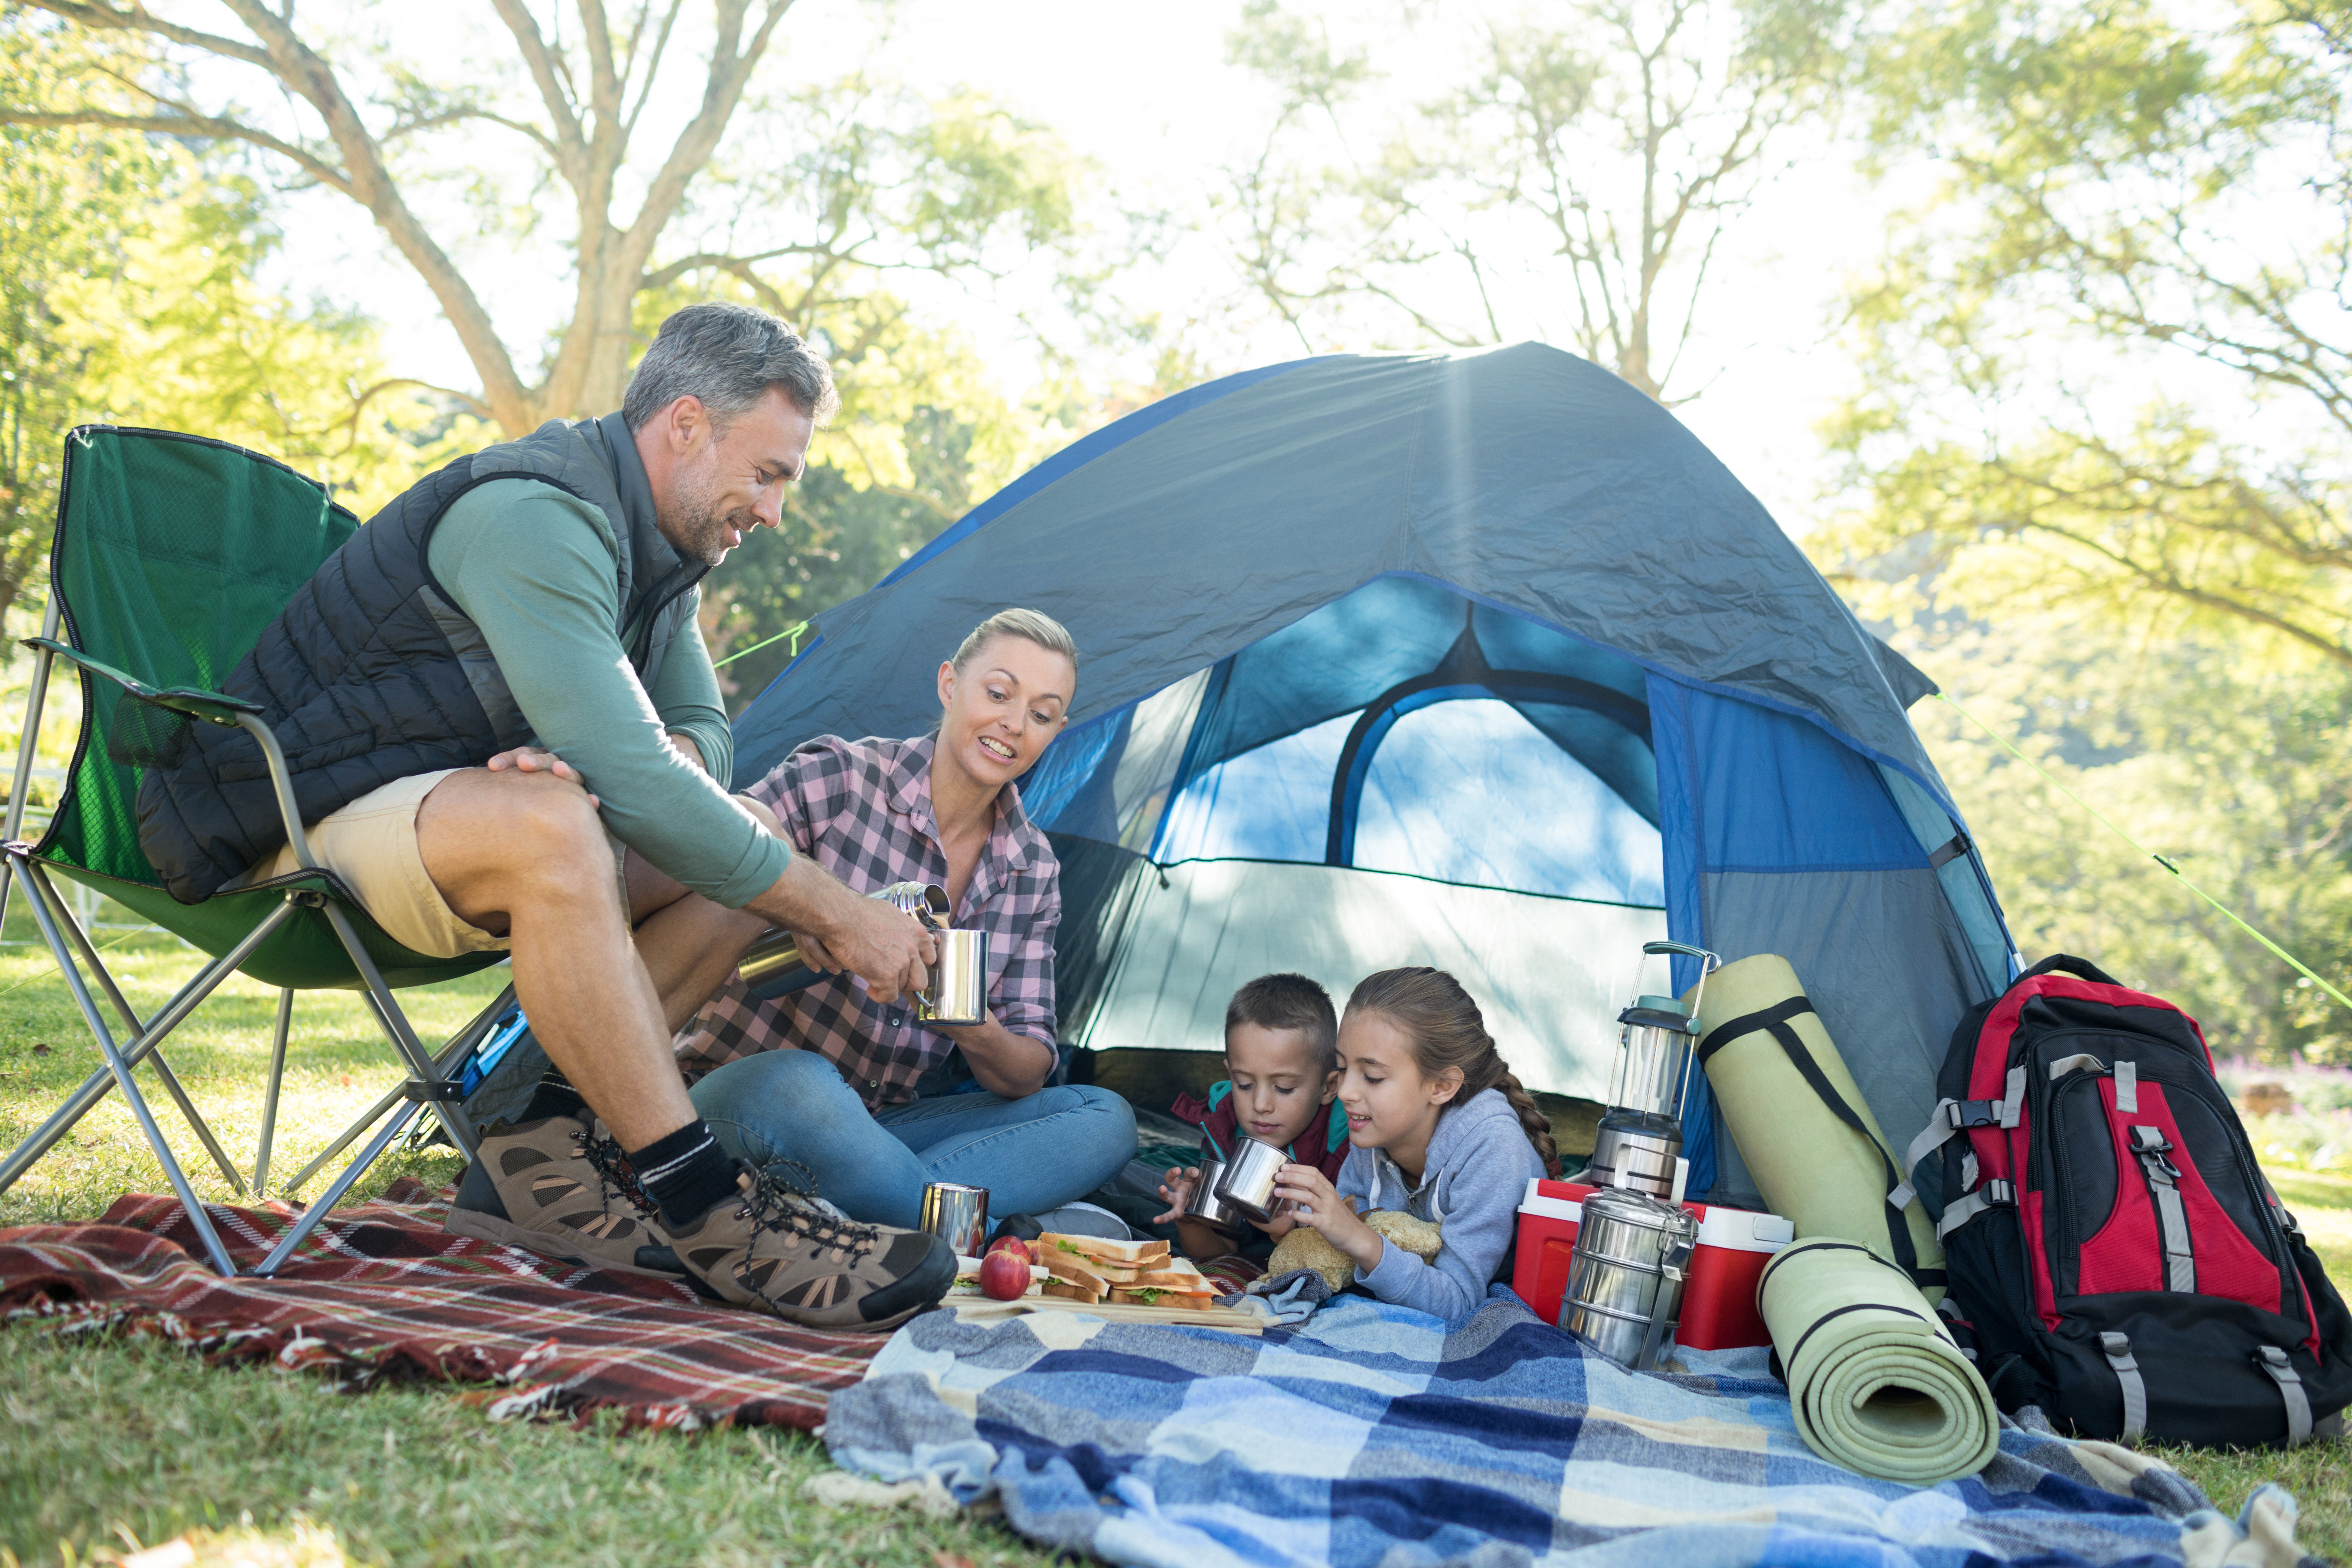 Family camping together in a tent